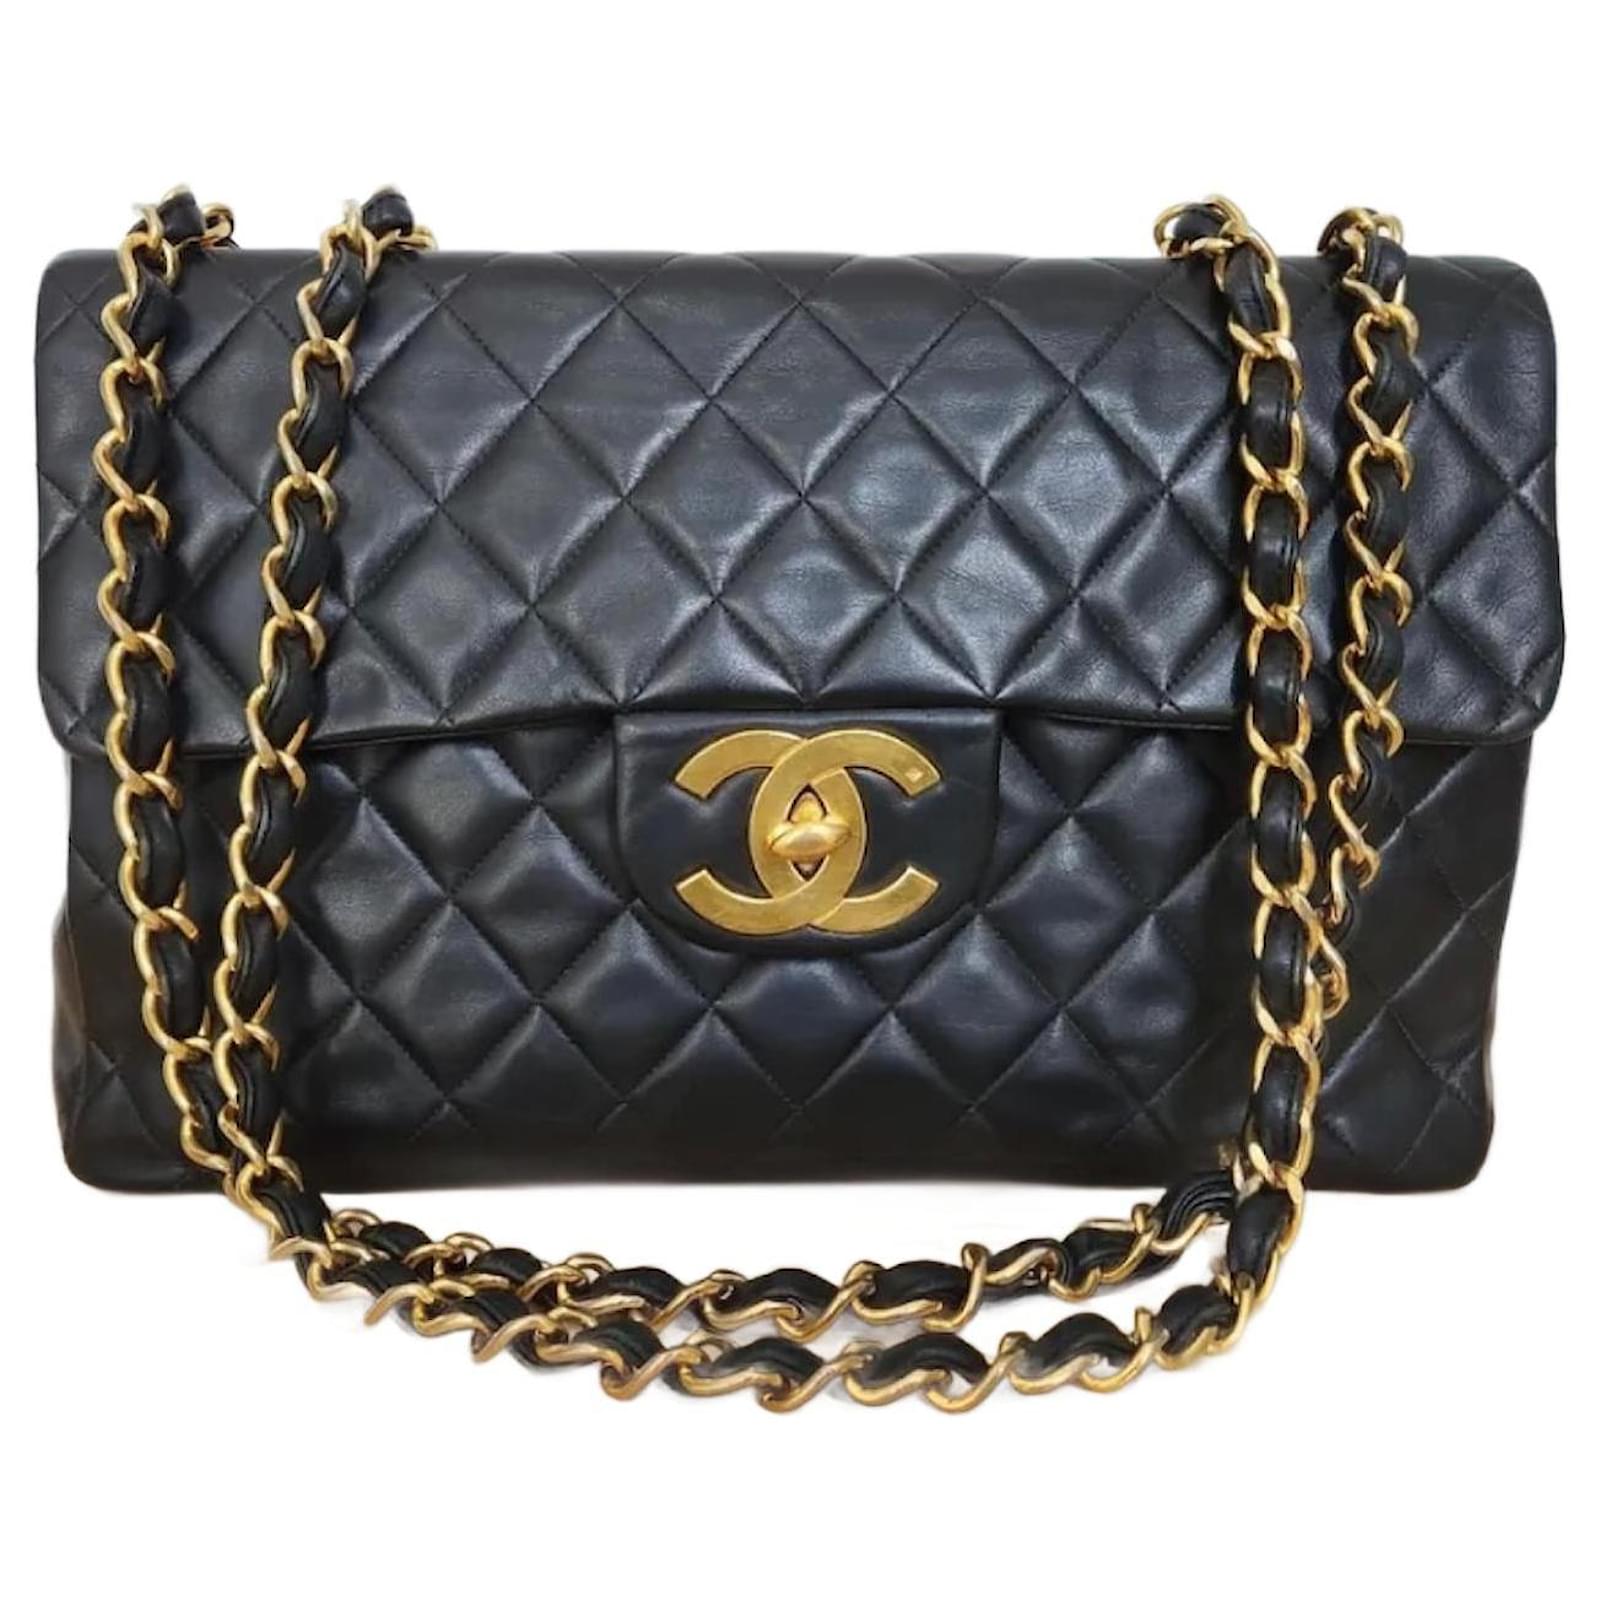 Chanel Vintage Jumbo Black Quilted Lambskin Leather Timeless